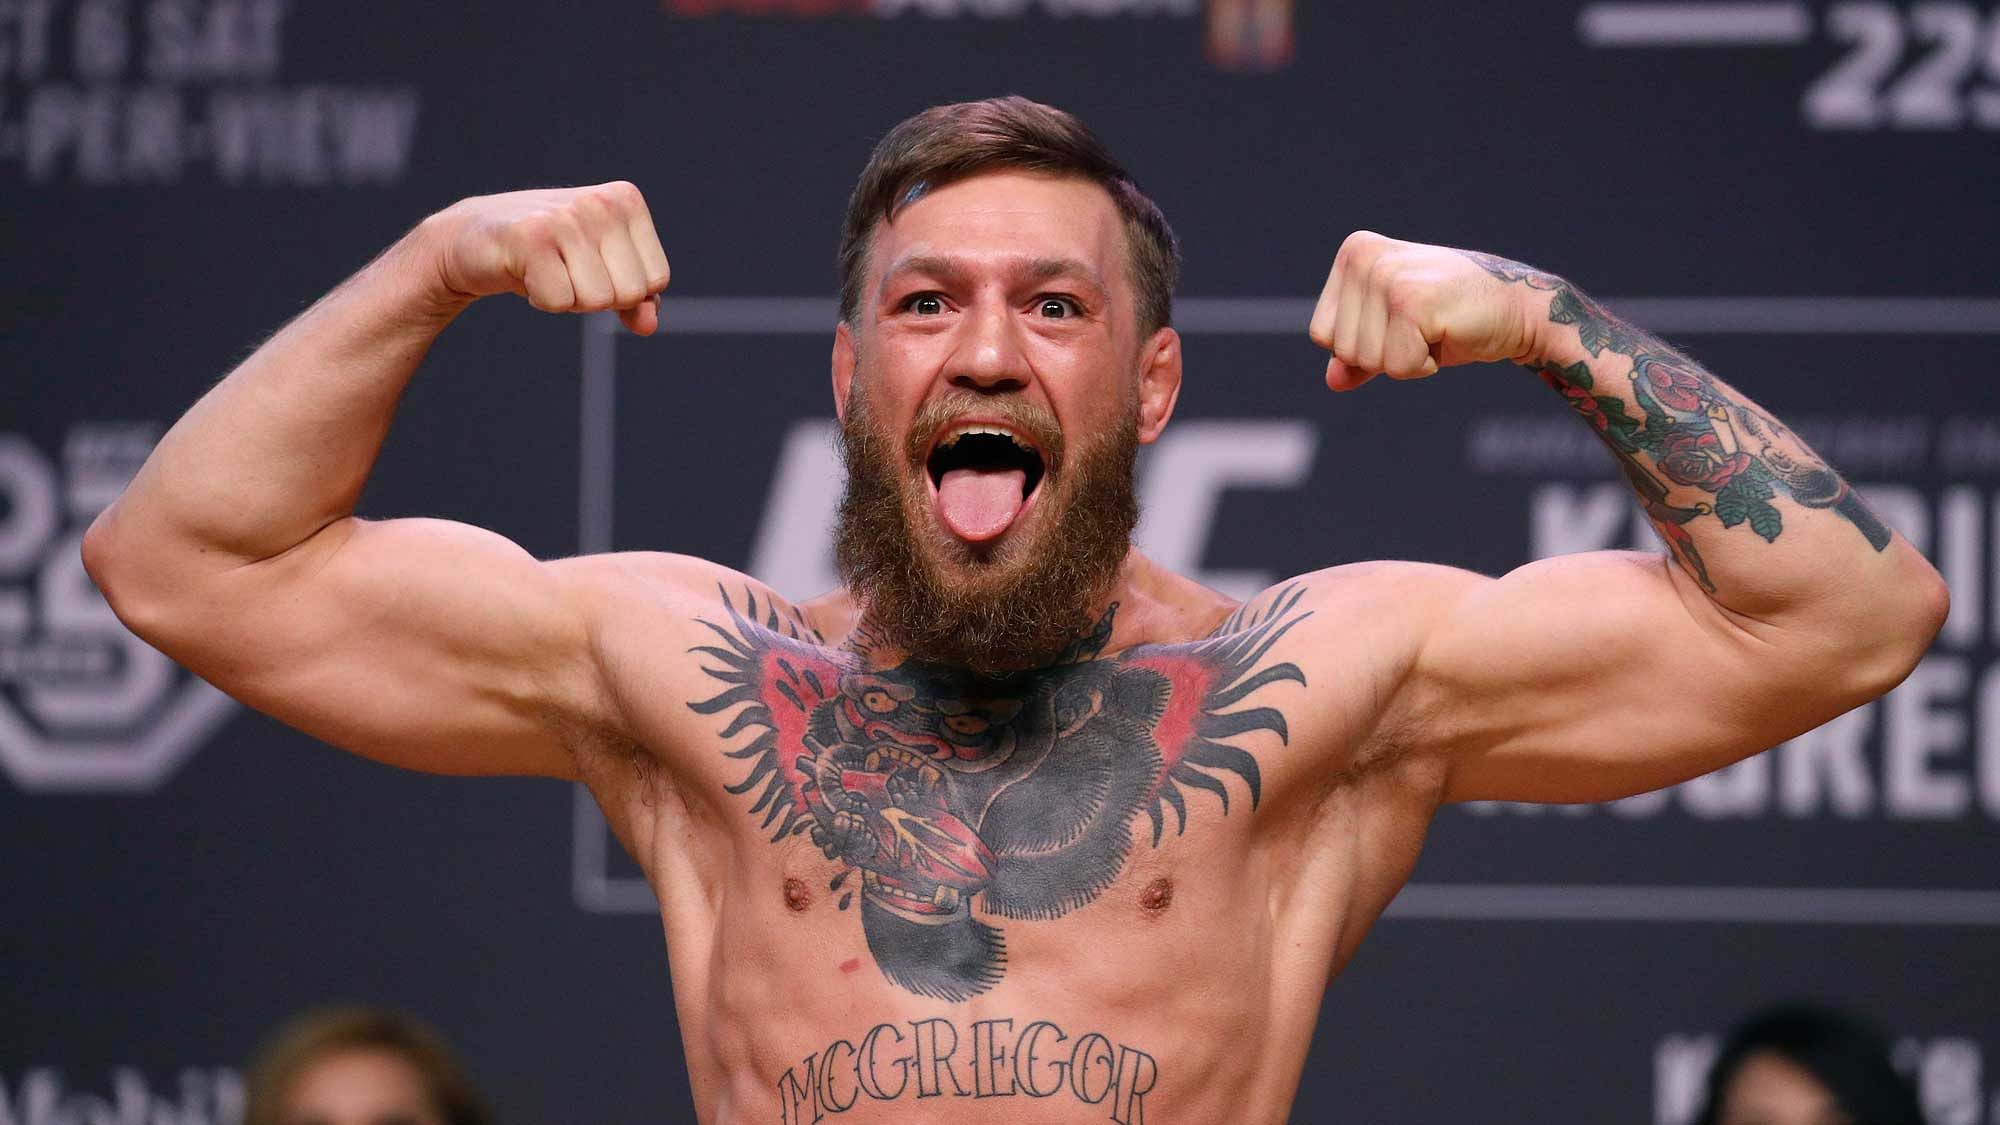 Conor McGregor poses during a ceremonial weigh-in for the UFC 229 mixed martial arts fight Friday, Oct. 5, 2018, in Las Vegas. McGregor is scheduled to fight Khabib Nurmagomedov Saturday in Las Vegas.&nbsp;